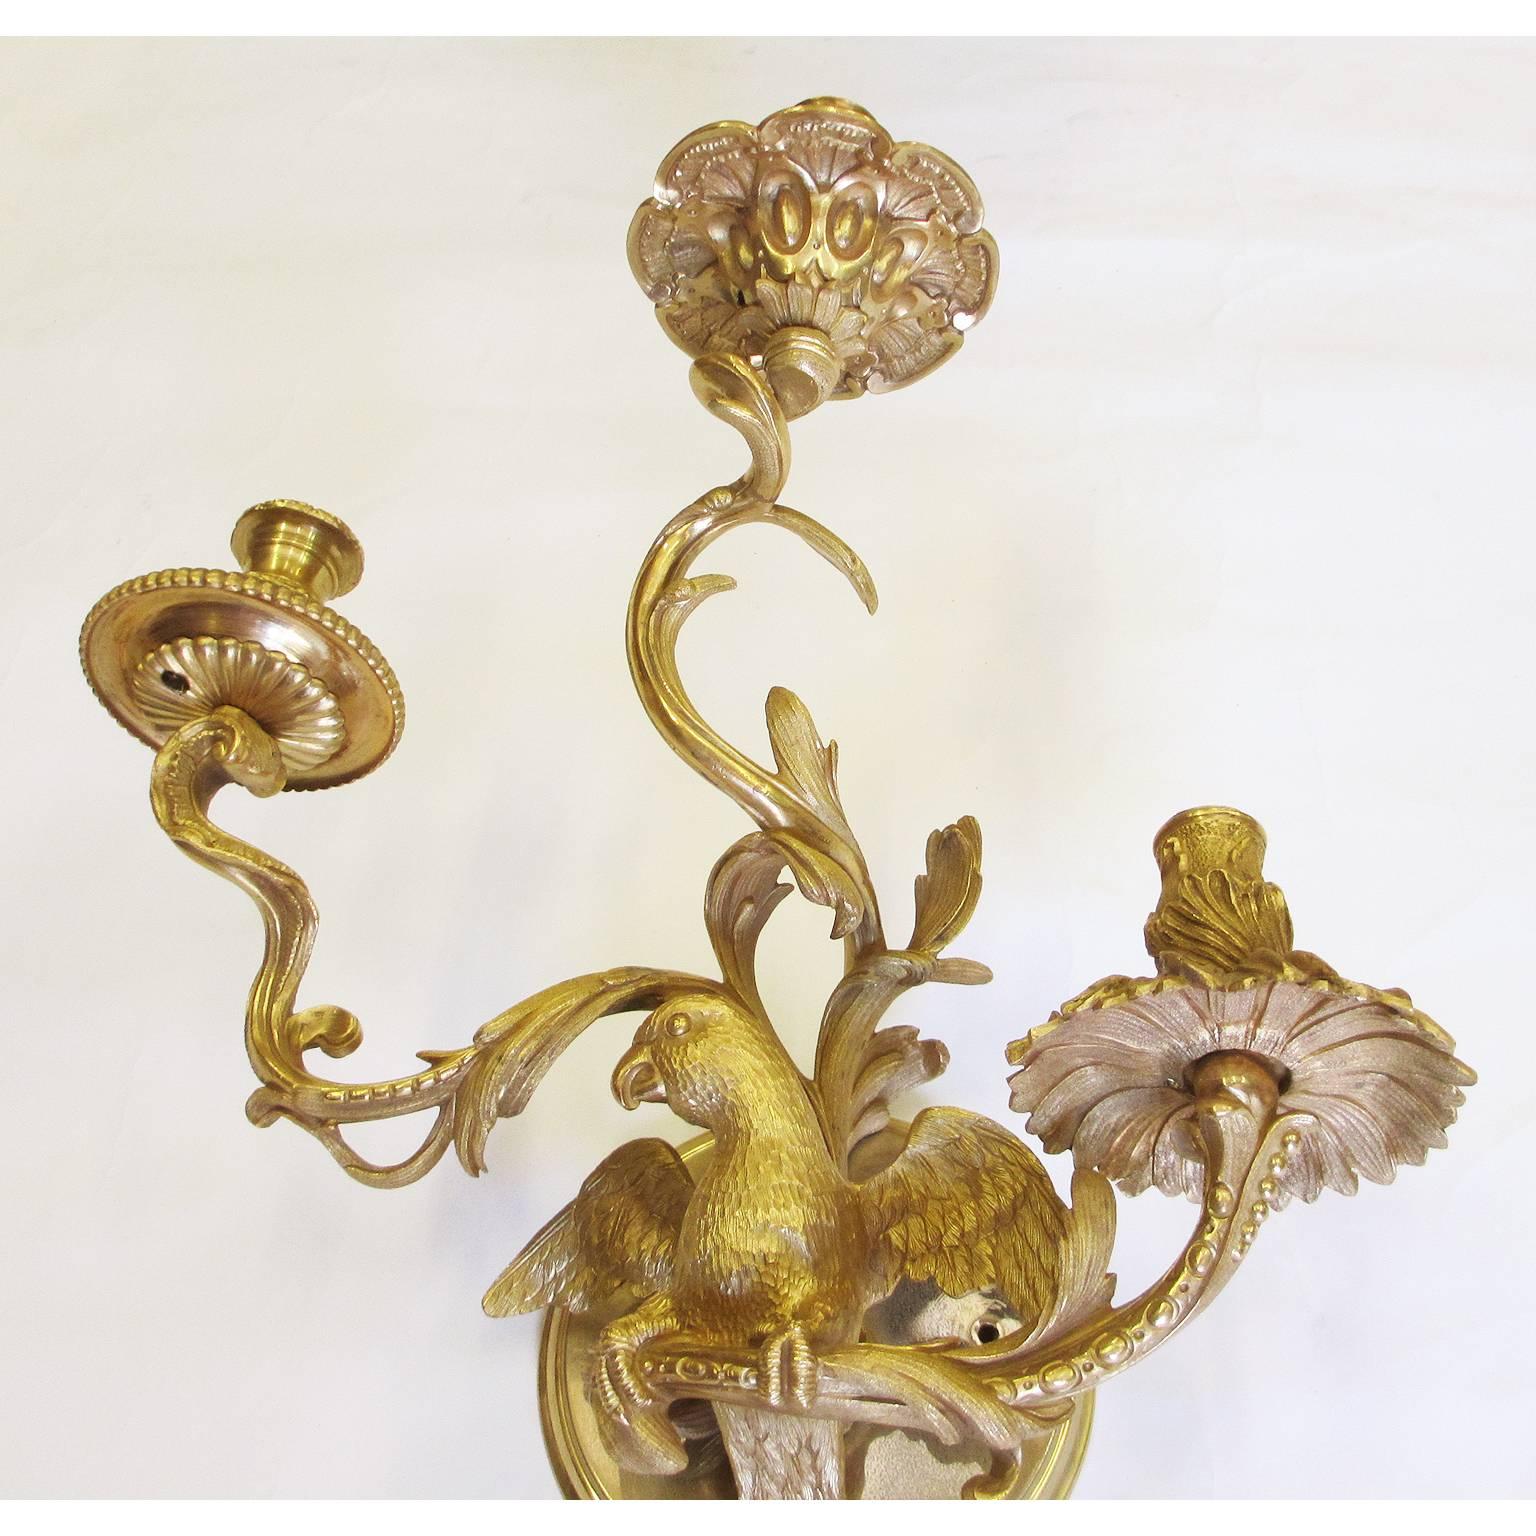 Rococo Revival Pair of French 20th Century Louis XV Style Wall Lights from the Spelling Manor